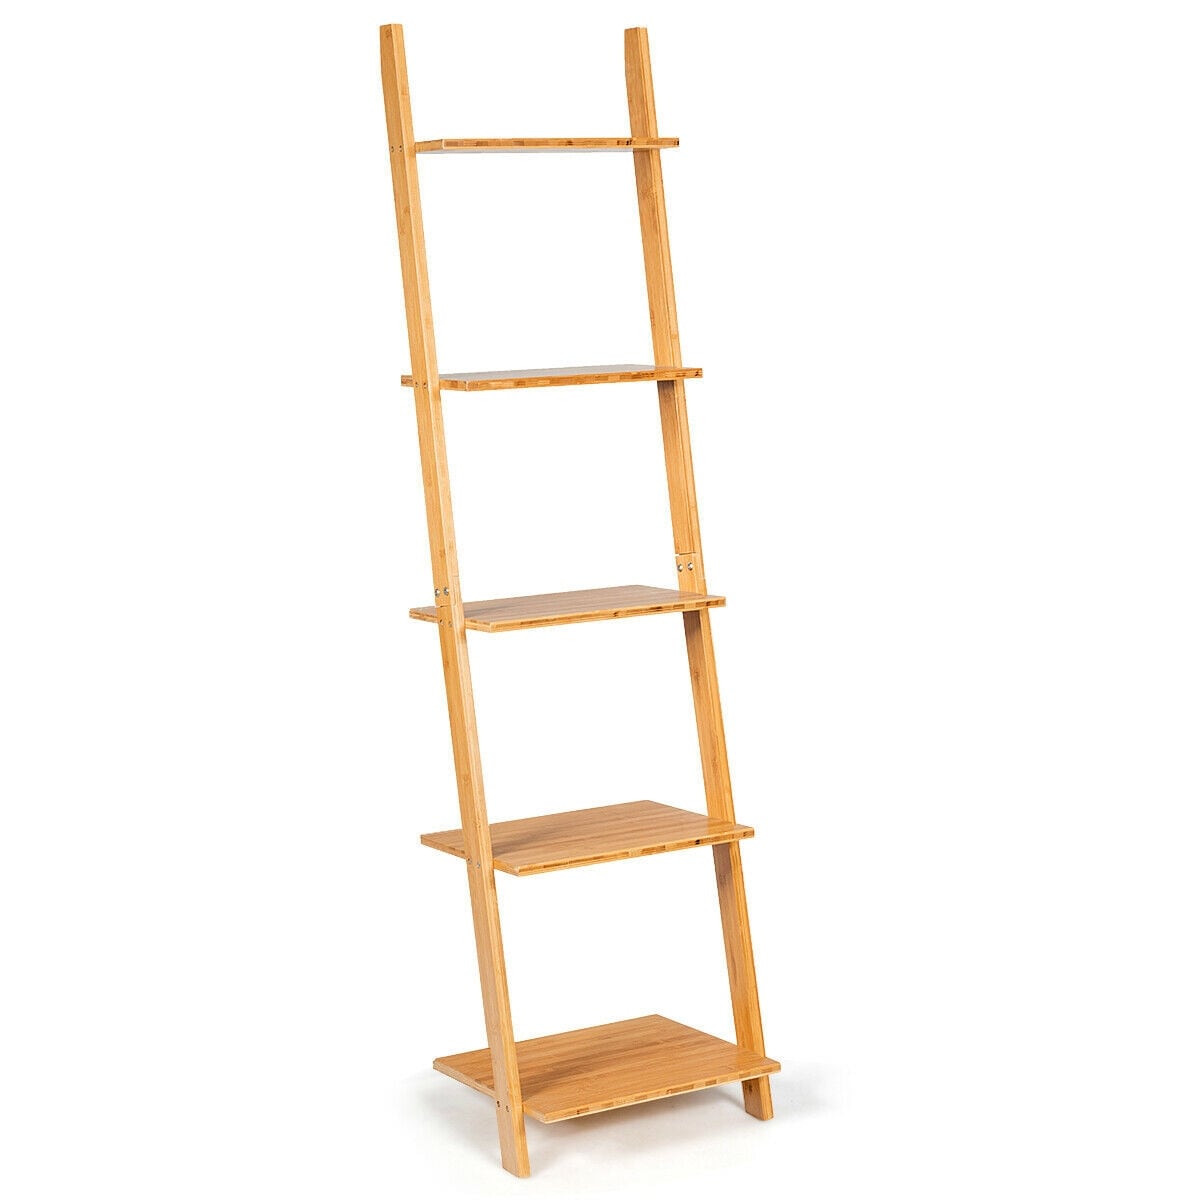 https://ak1.ostkcdn.com/images/products/is/images/direct/3a297a56bfe2888ccd35acf3d481049069a0a285/Gymax-5-Tier-Ladder-Shelf-Modern-Bamboo-Leaning-Bookshelf-Ladder.jpg